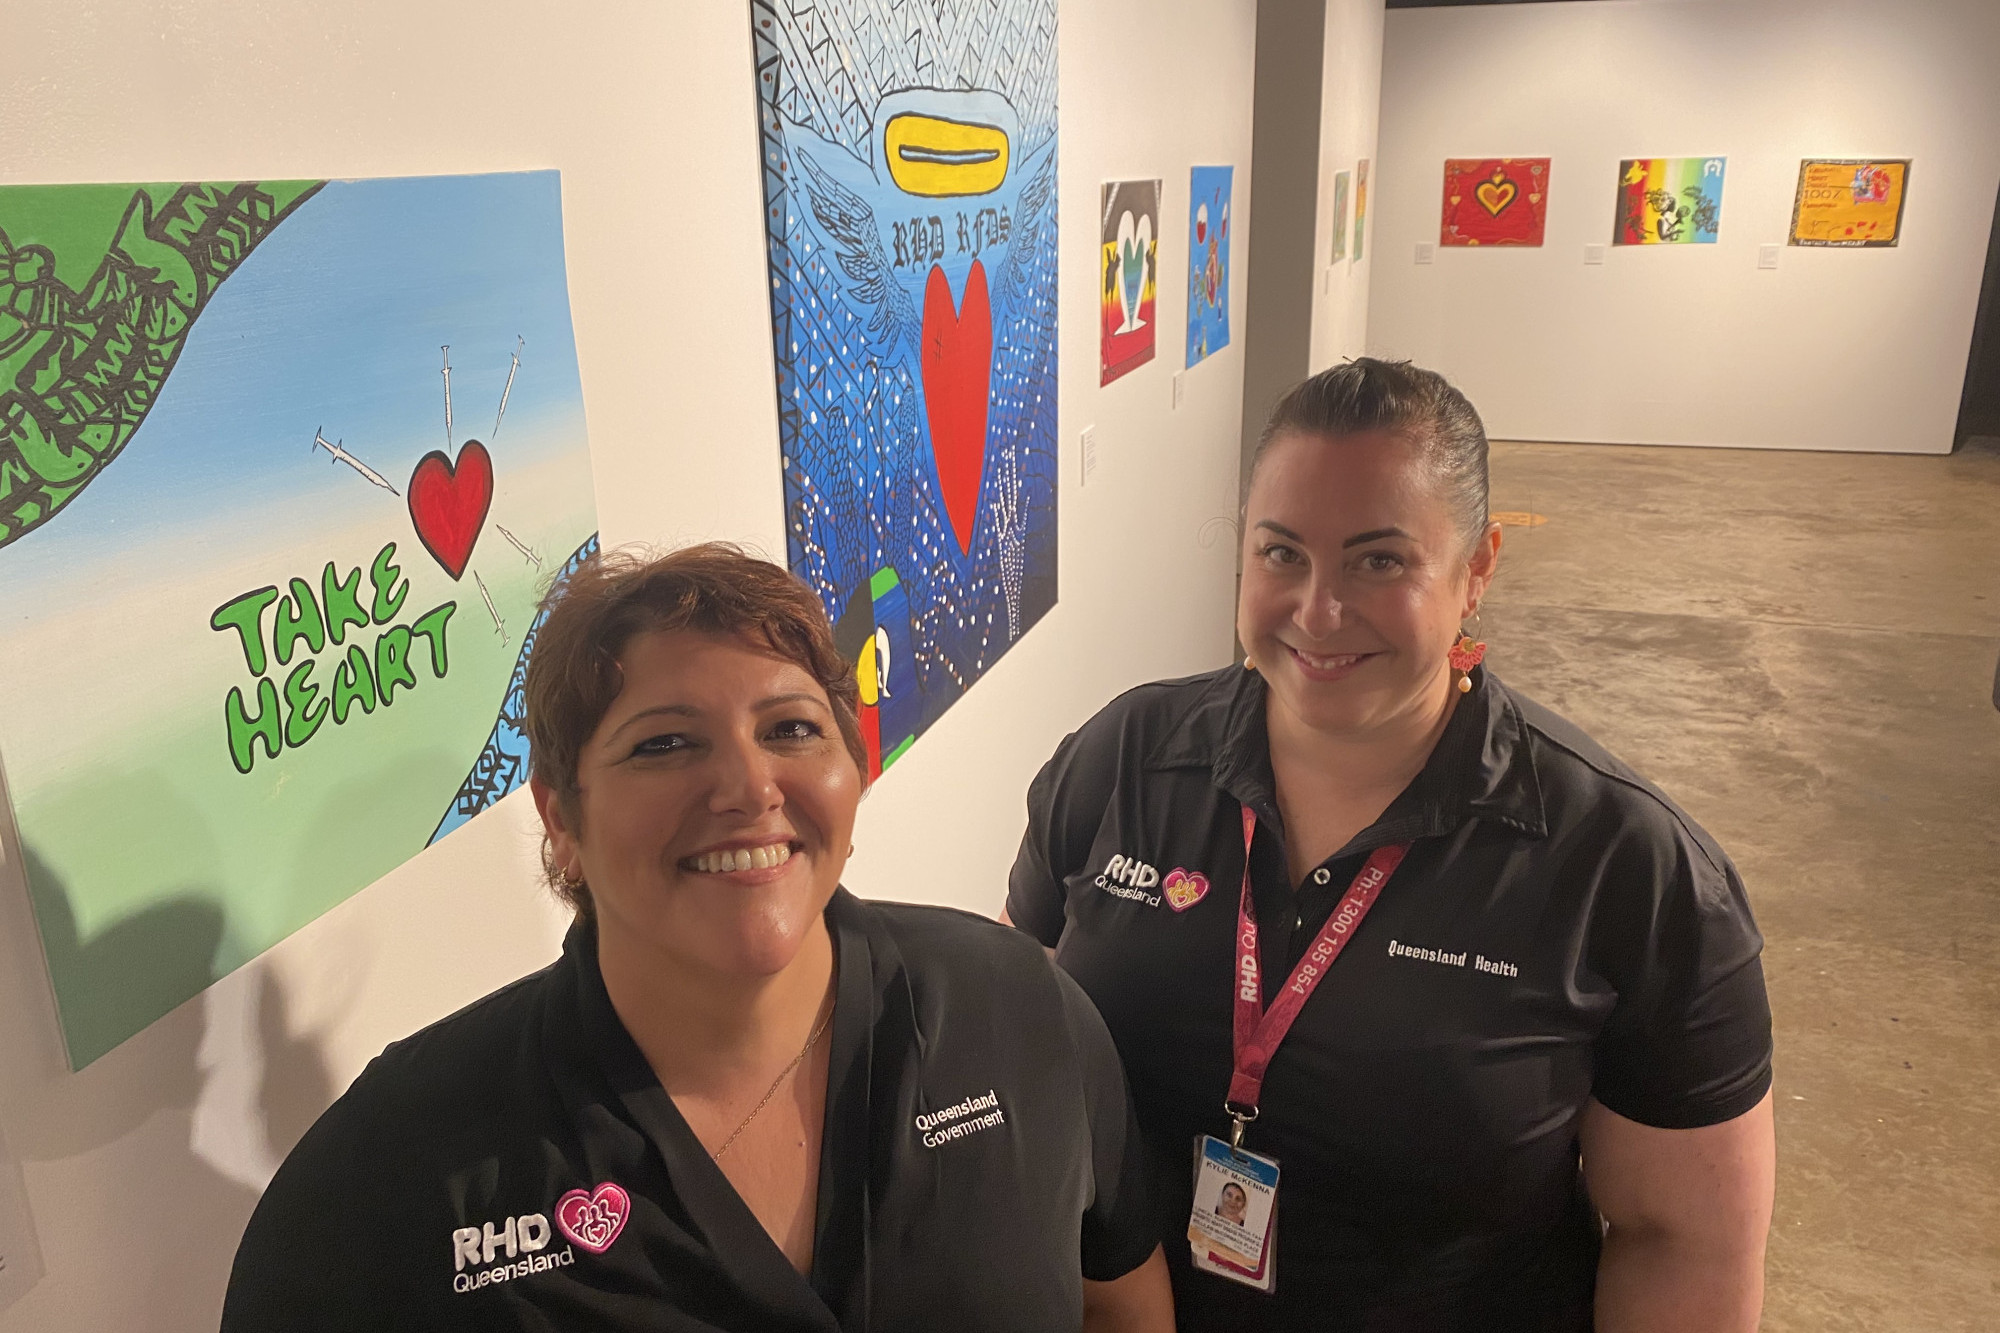 Townsville Clinical Nurse Consultant Georgina Hughes and RHD Program manager Kylie McKenna check out the artwork for the RHD (Rheumatic Heart Disease) themed exhibition at Tanks Art Centre, Edge Hill.